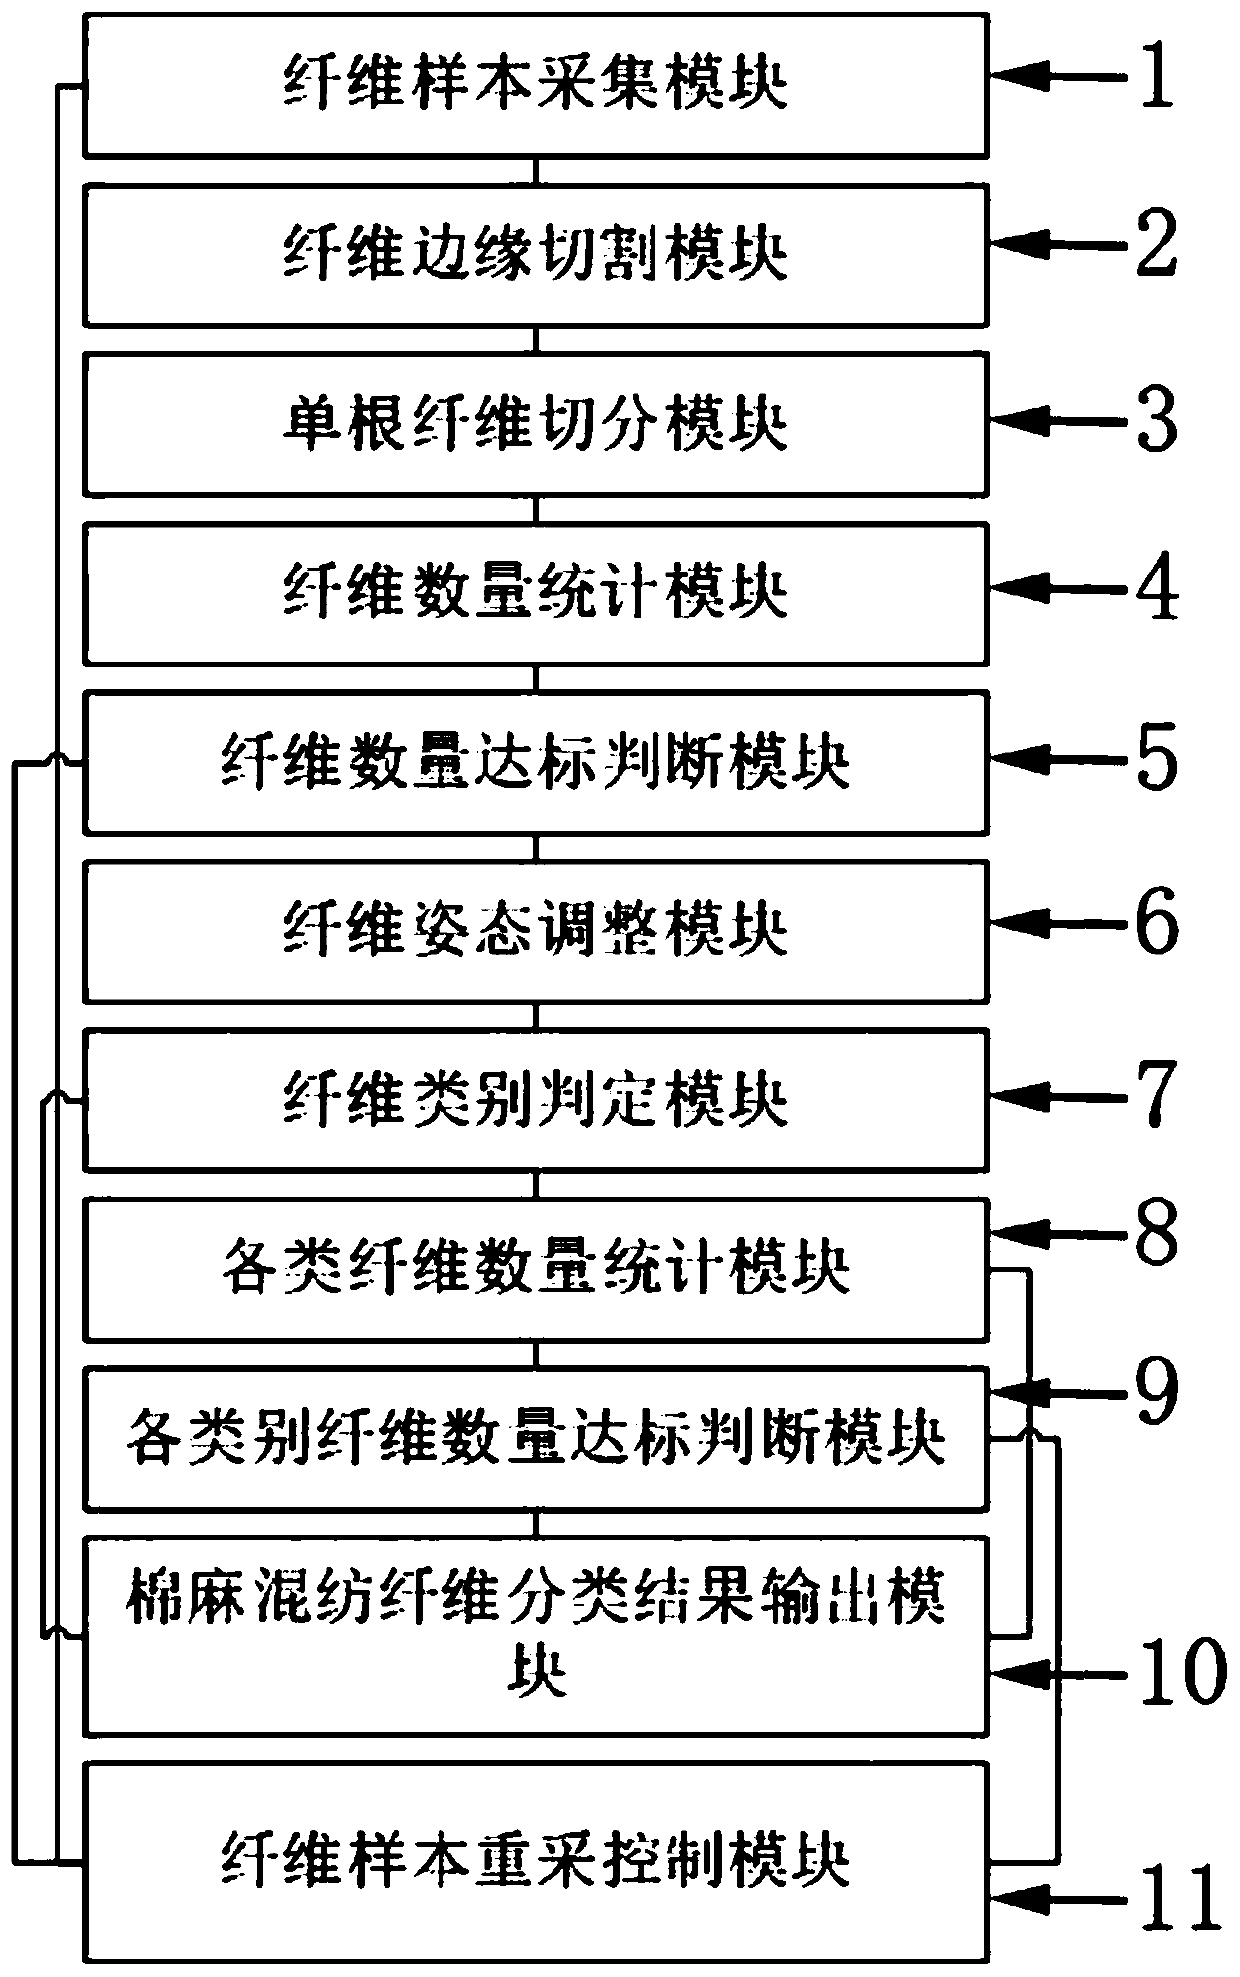 Cotton and linen blend fiber morphological characteristic identification system and identification method